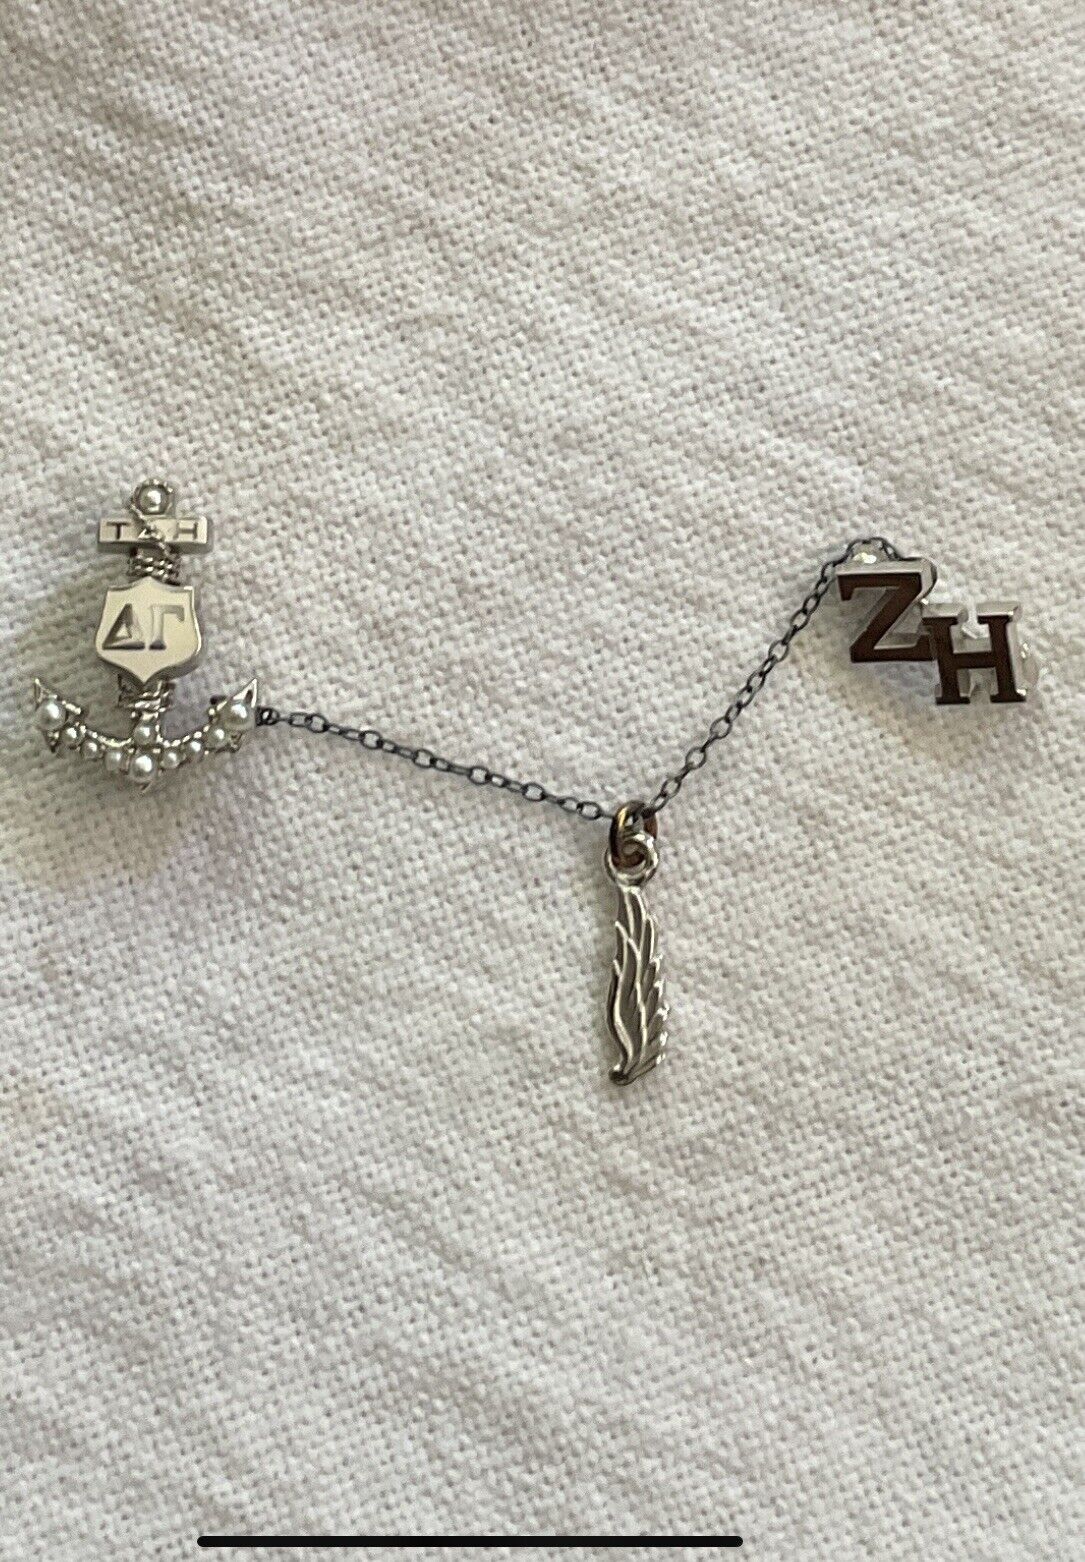 RARE White Gold Delta Gamma Sorority Pin / Badge With Chapter Pin And Dangle